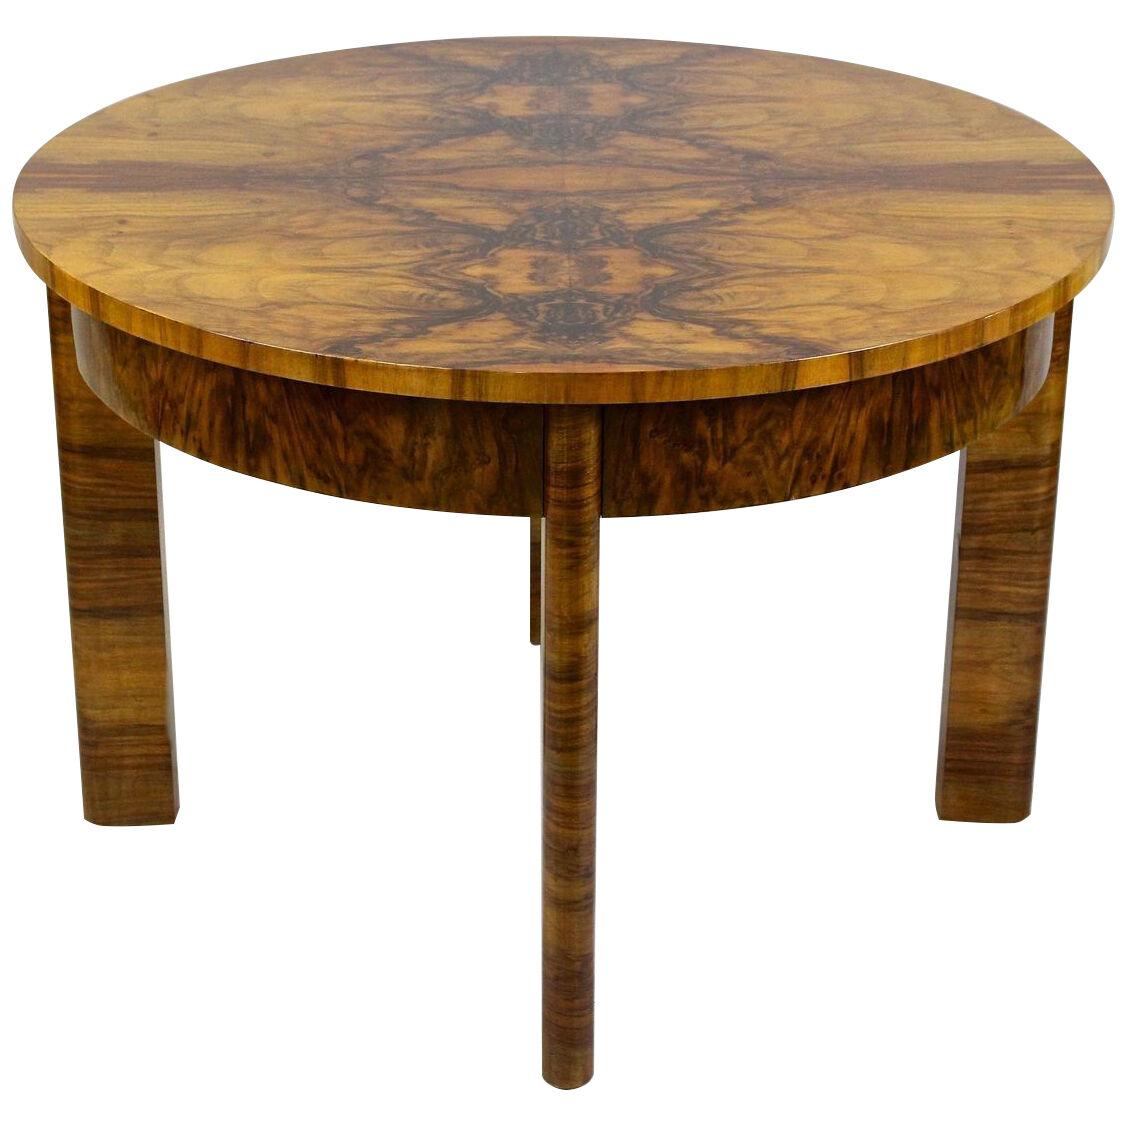 Art Deco Round Coffee Table/ Side Table Burr Walnut 20th Century, AT ca. 1920